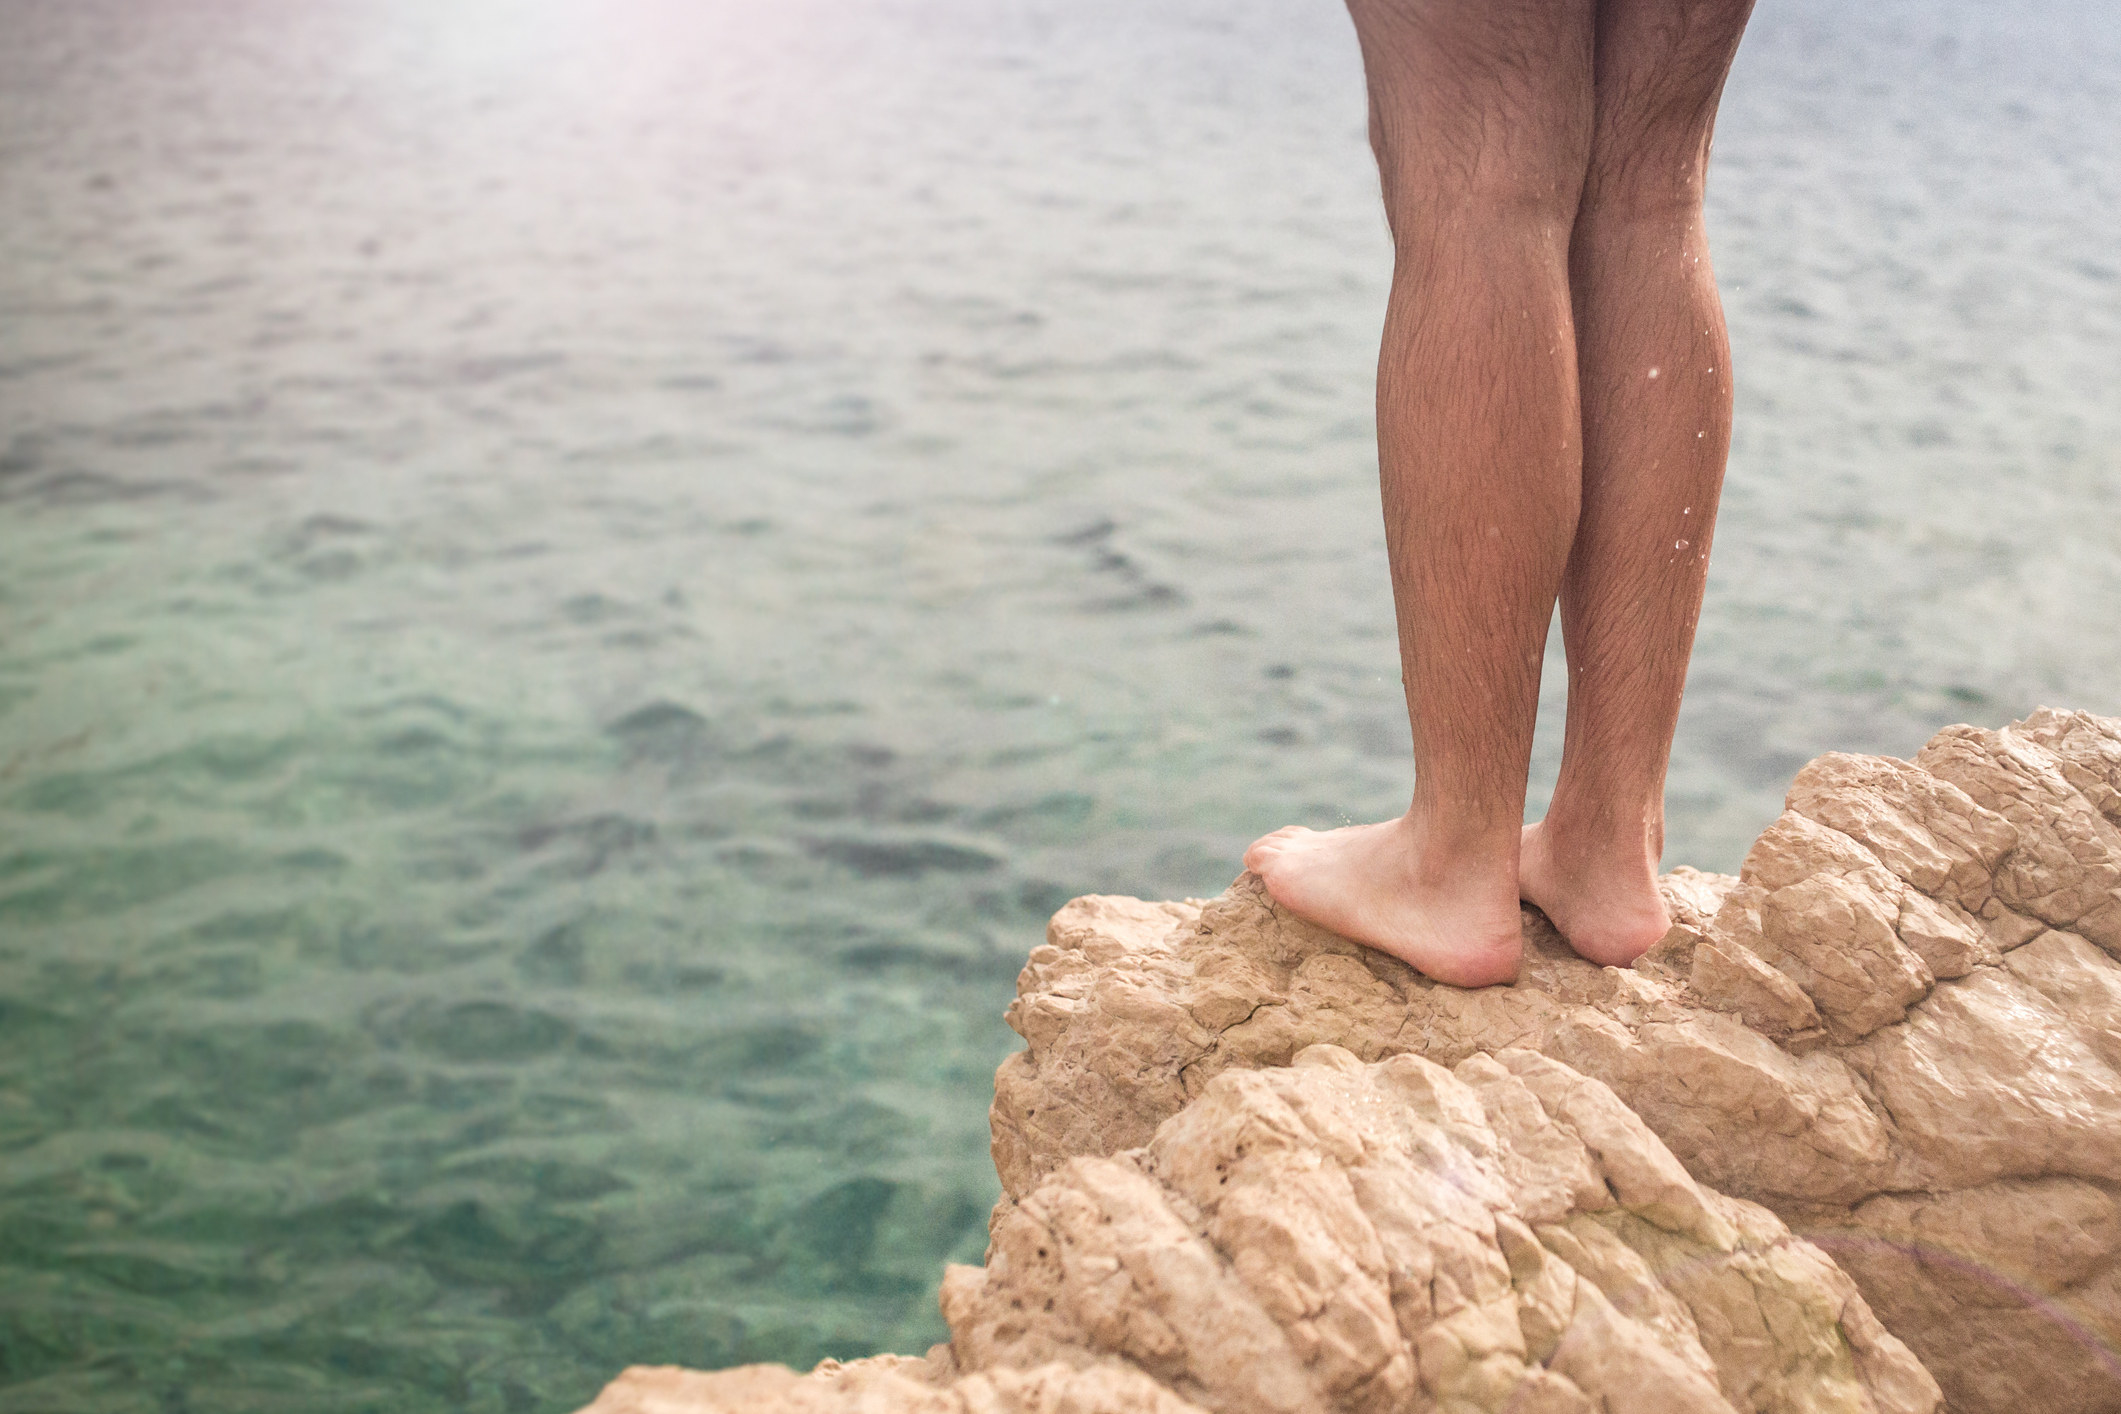 The legs of a person preparing to jump into a body of water off a rocky point